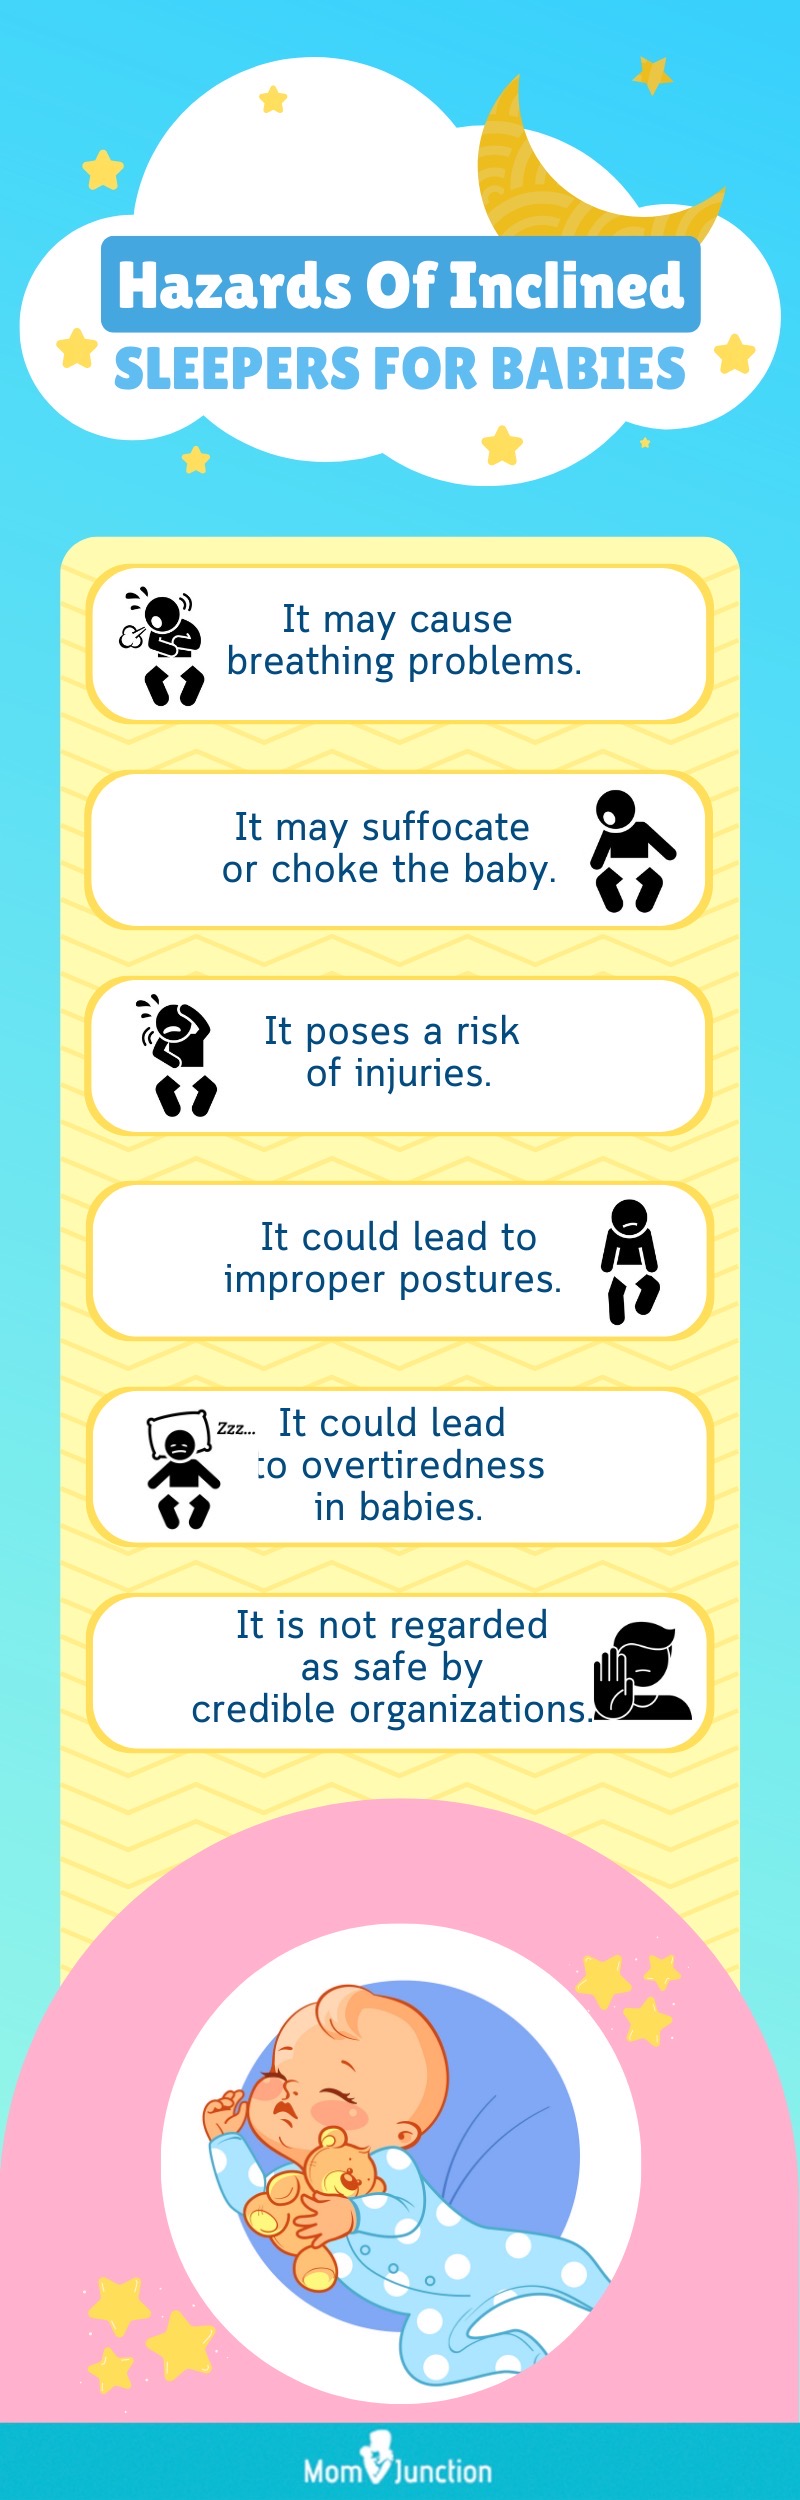 hazards of inclined sleepers for babies (infographic)